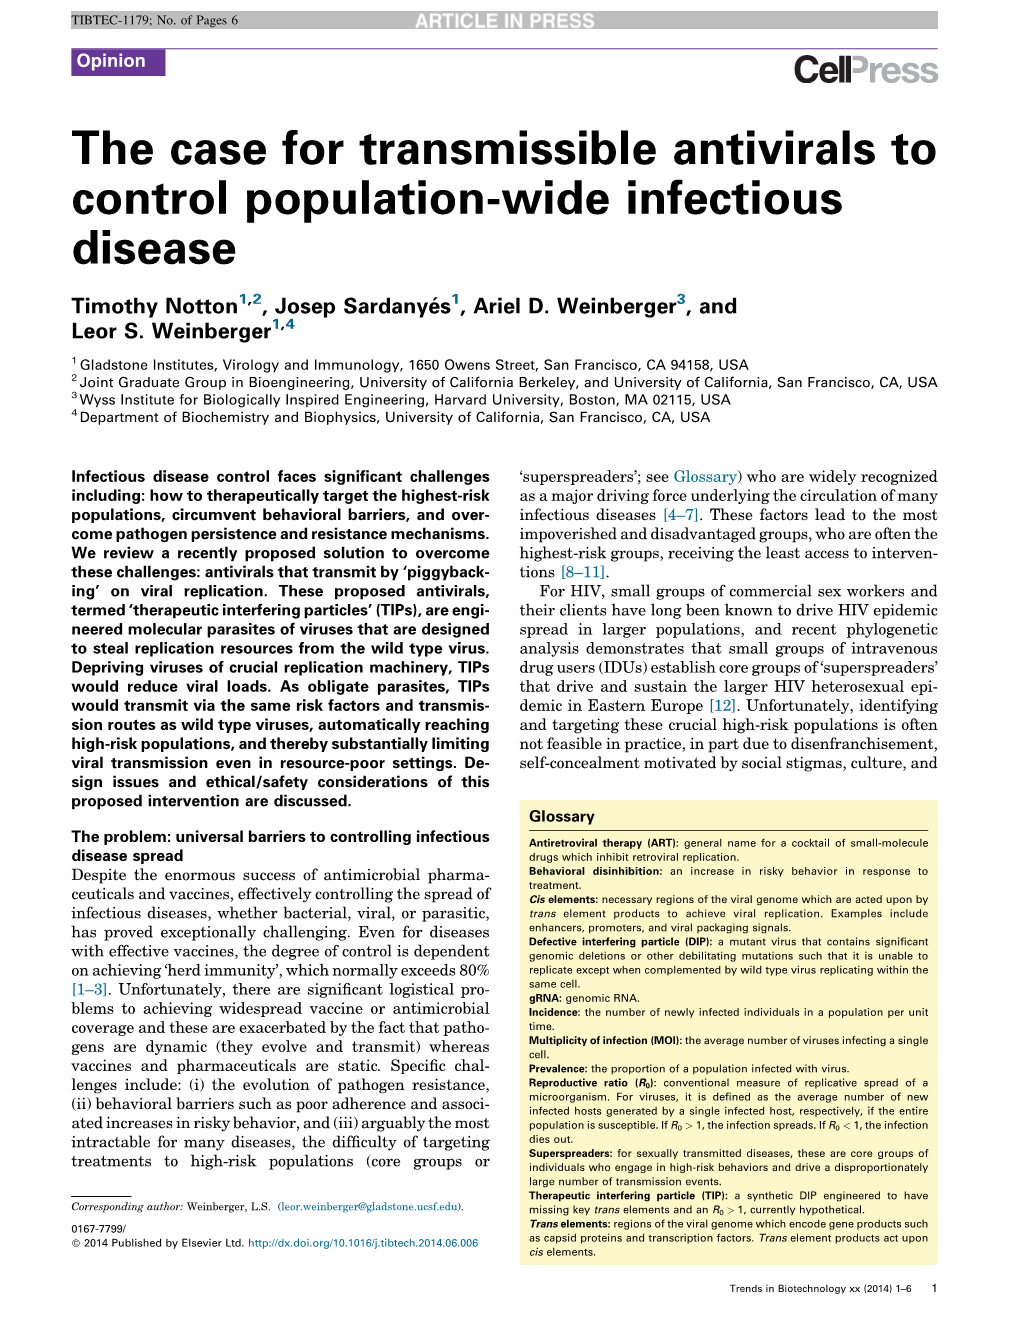 The Case for Transmissible Antivirals to Control Population-Wide Infectious Disease